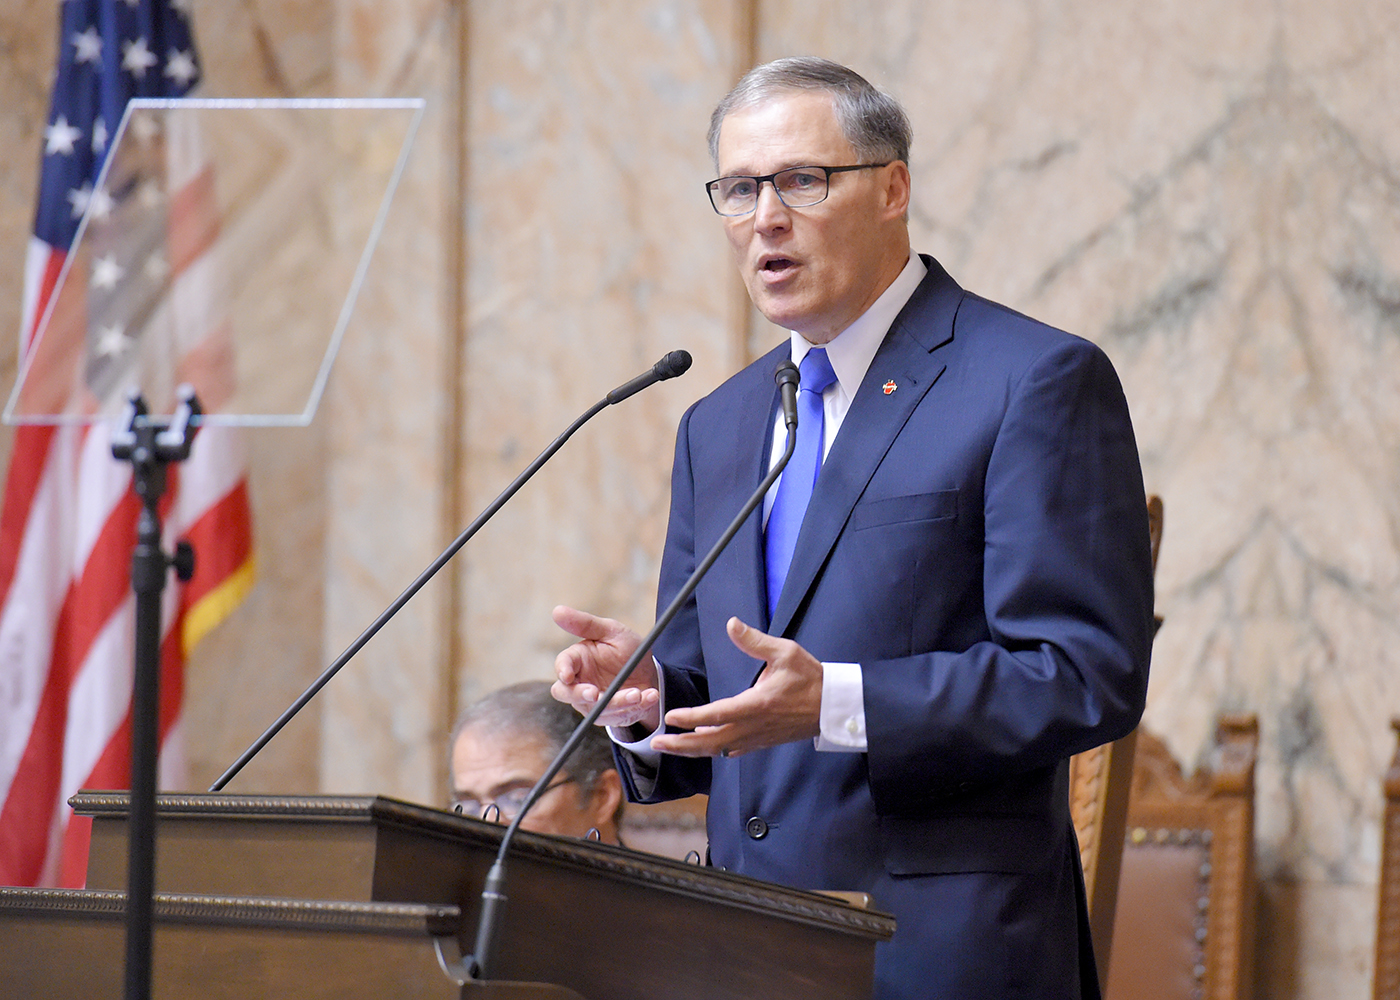 Senate committee guts Inslee plan to clean up toxics in fish